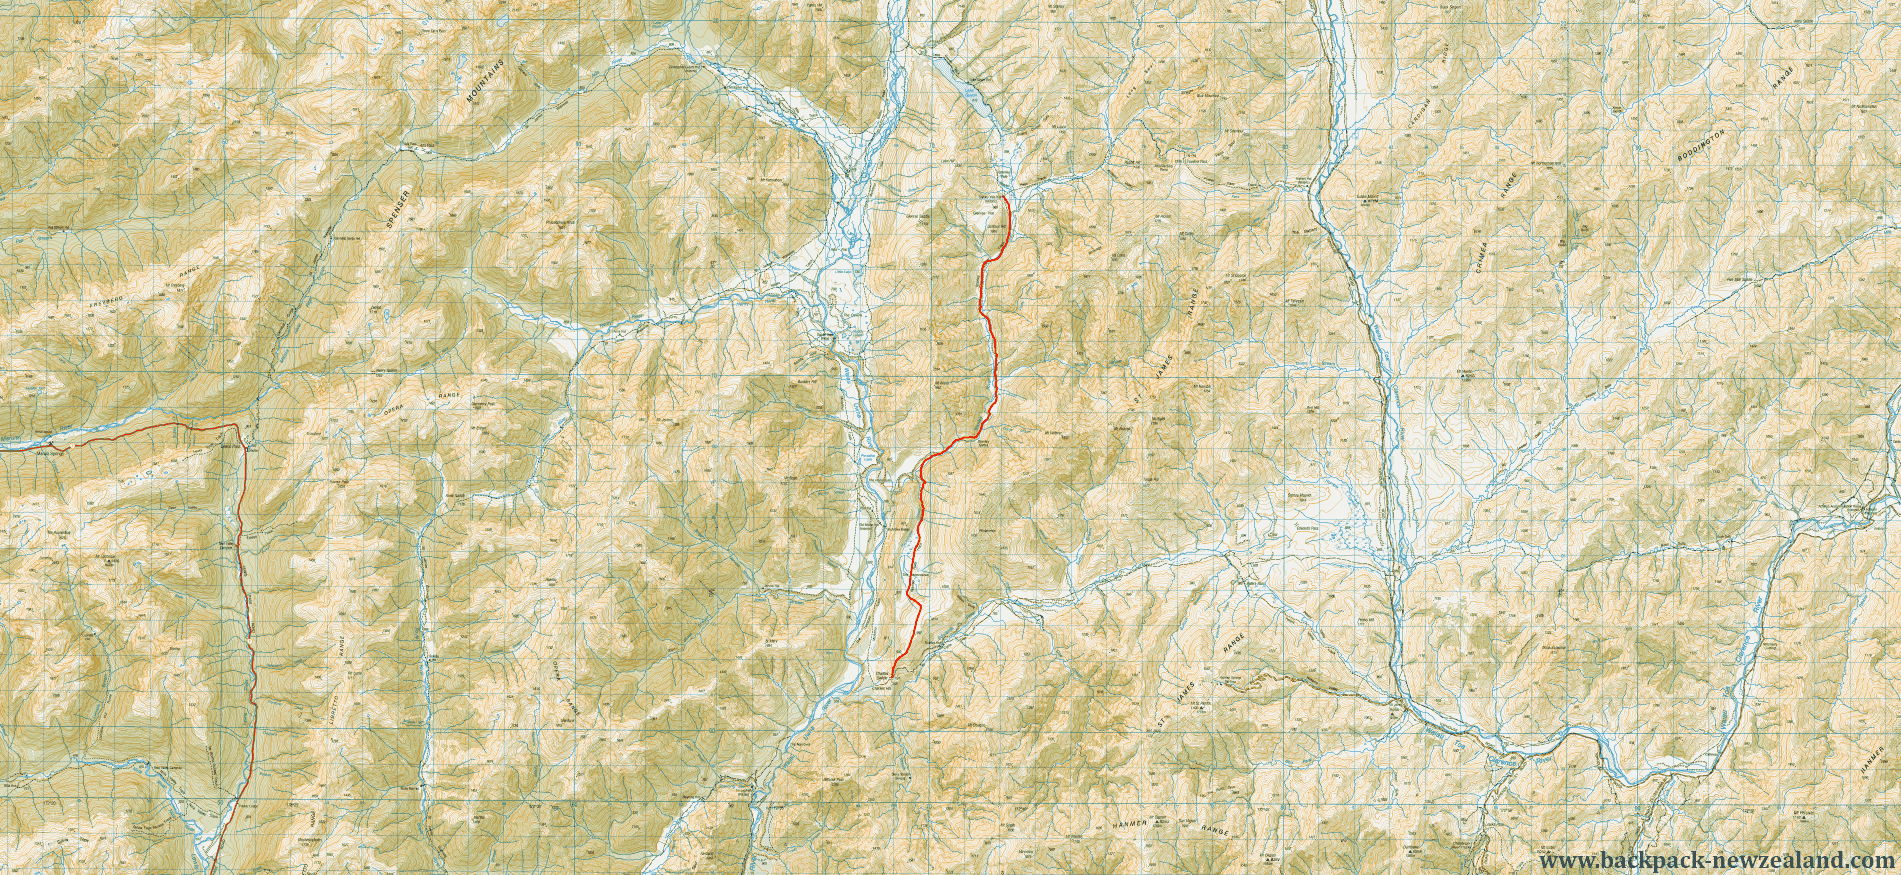 Stanley River Track Map - New Zealand Tracks